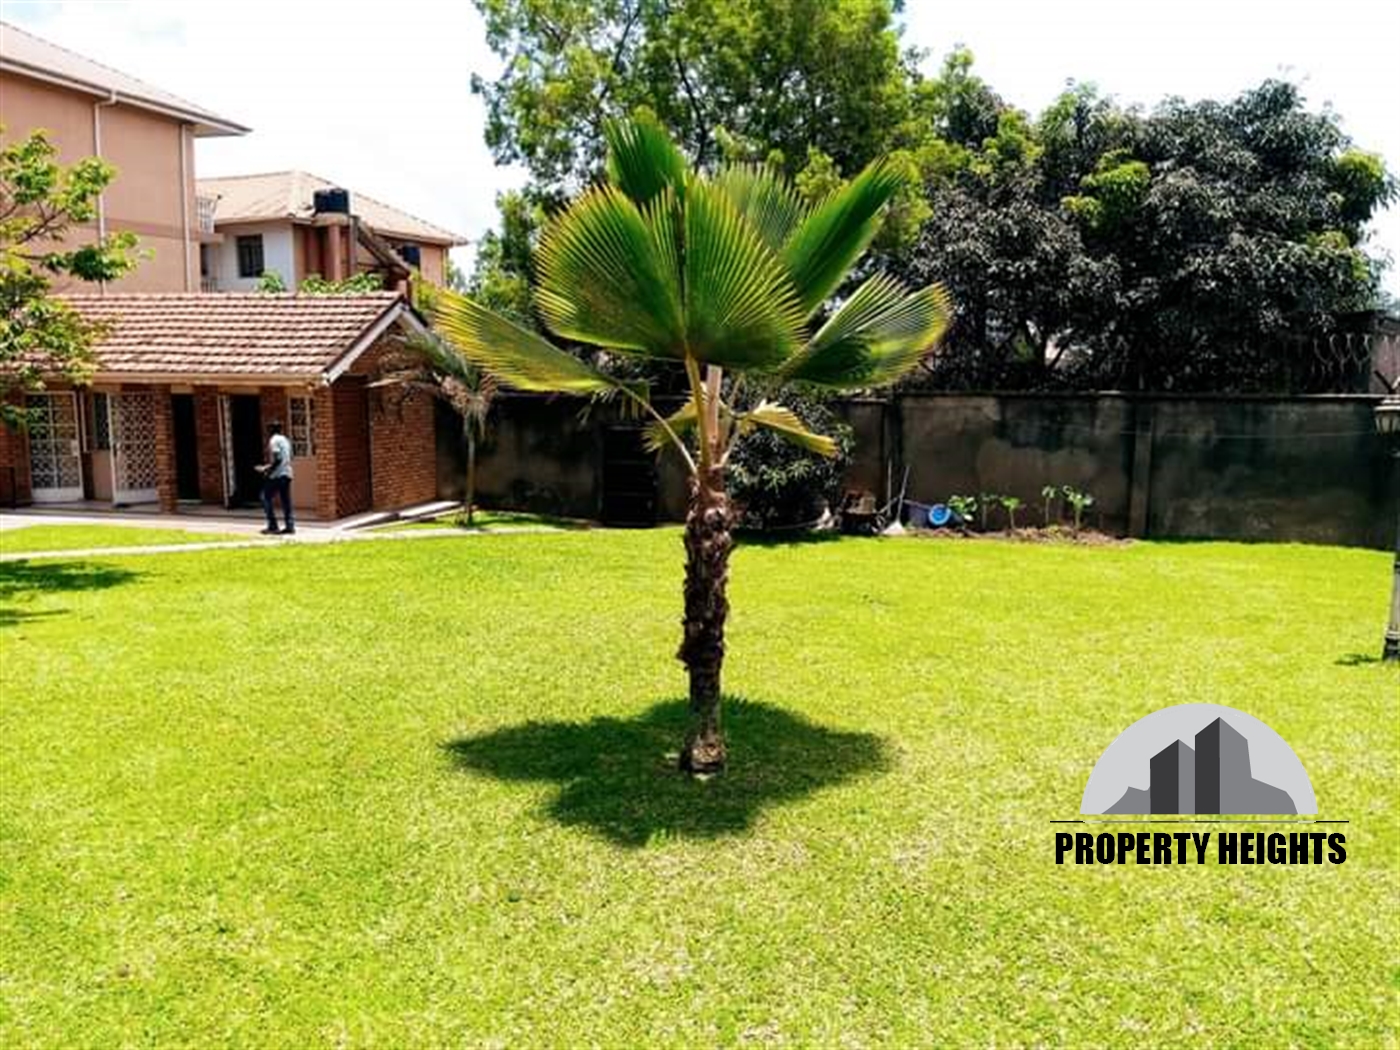 Mansion for sale in Mukono1 Wakiso